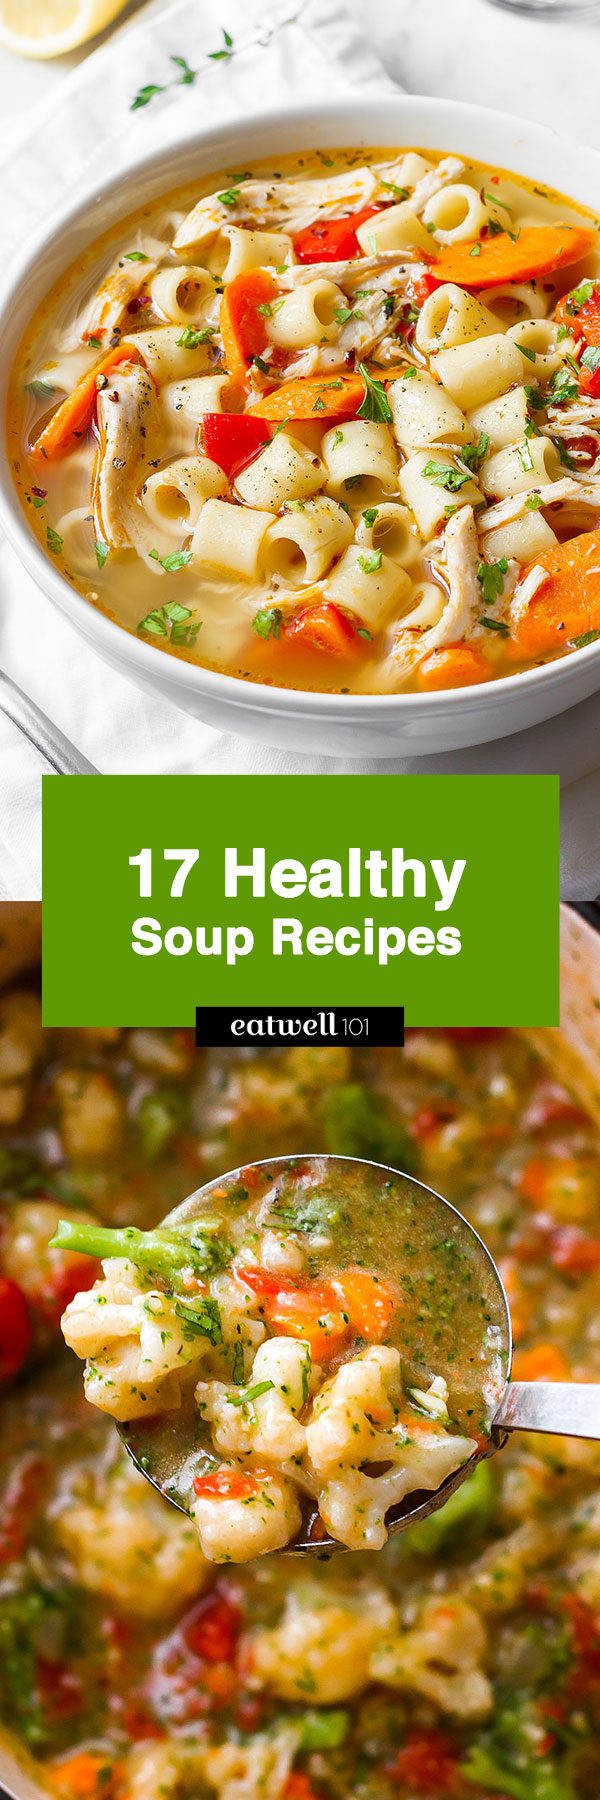 Healthy Soup Recipes — Come together quickly, with mostly pantry ingredients!